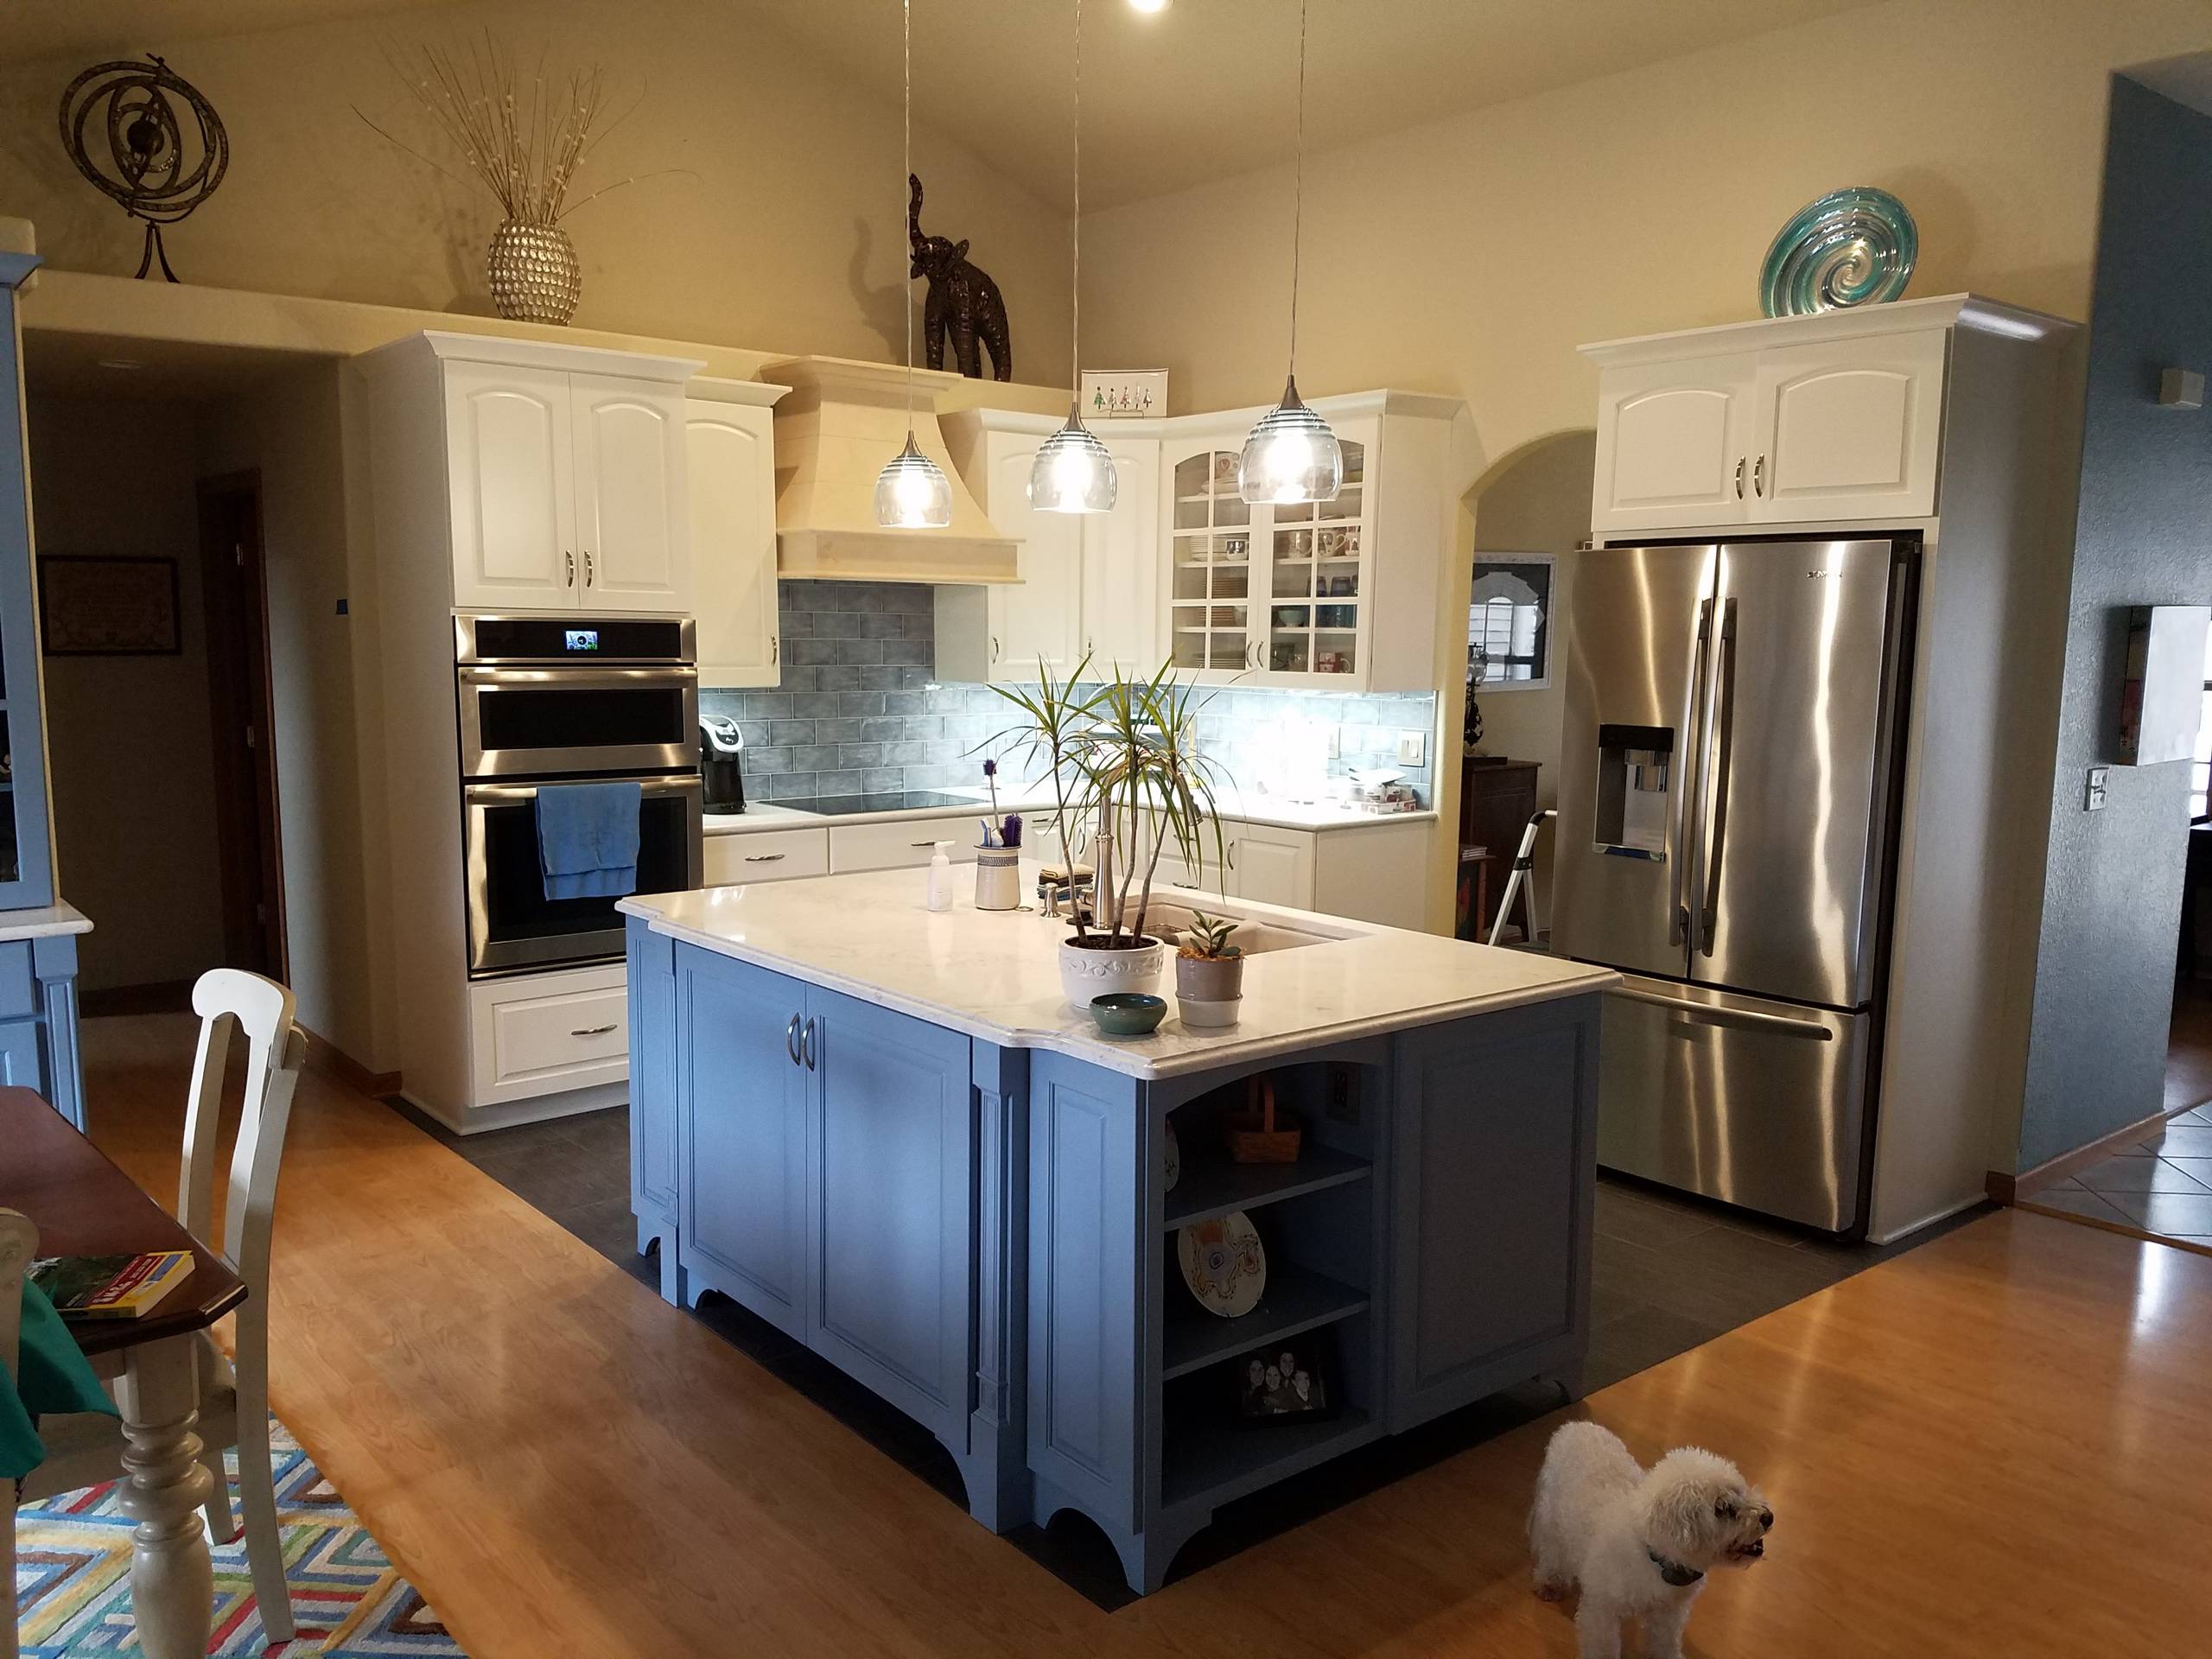 Kitchen with painted cabinetry